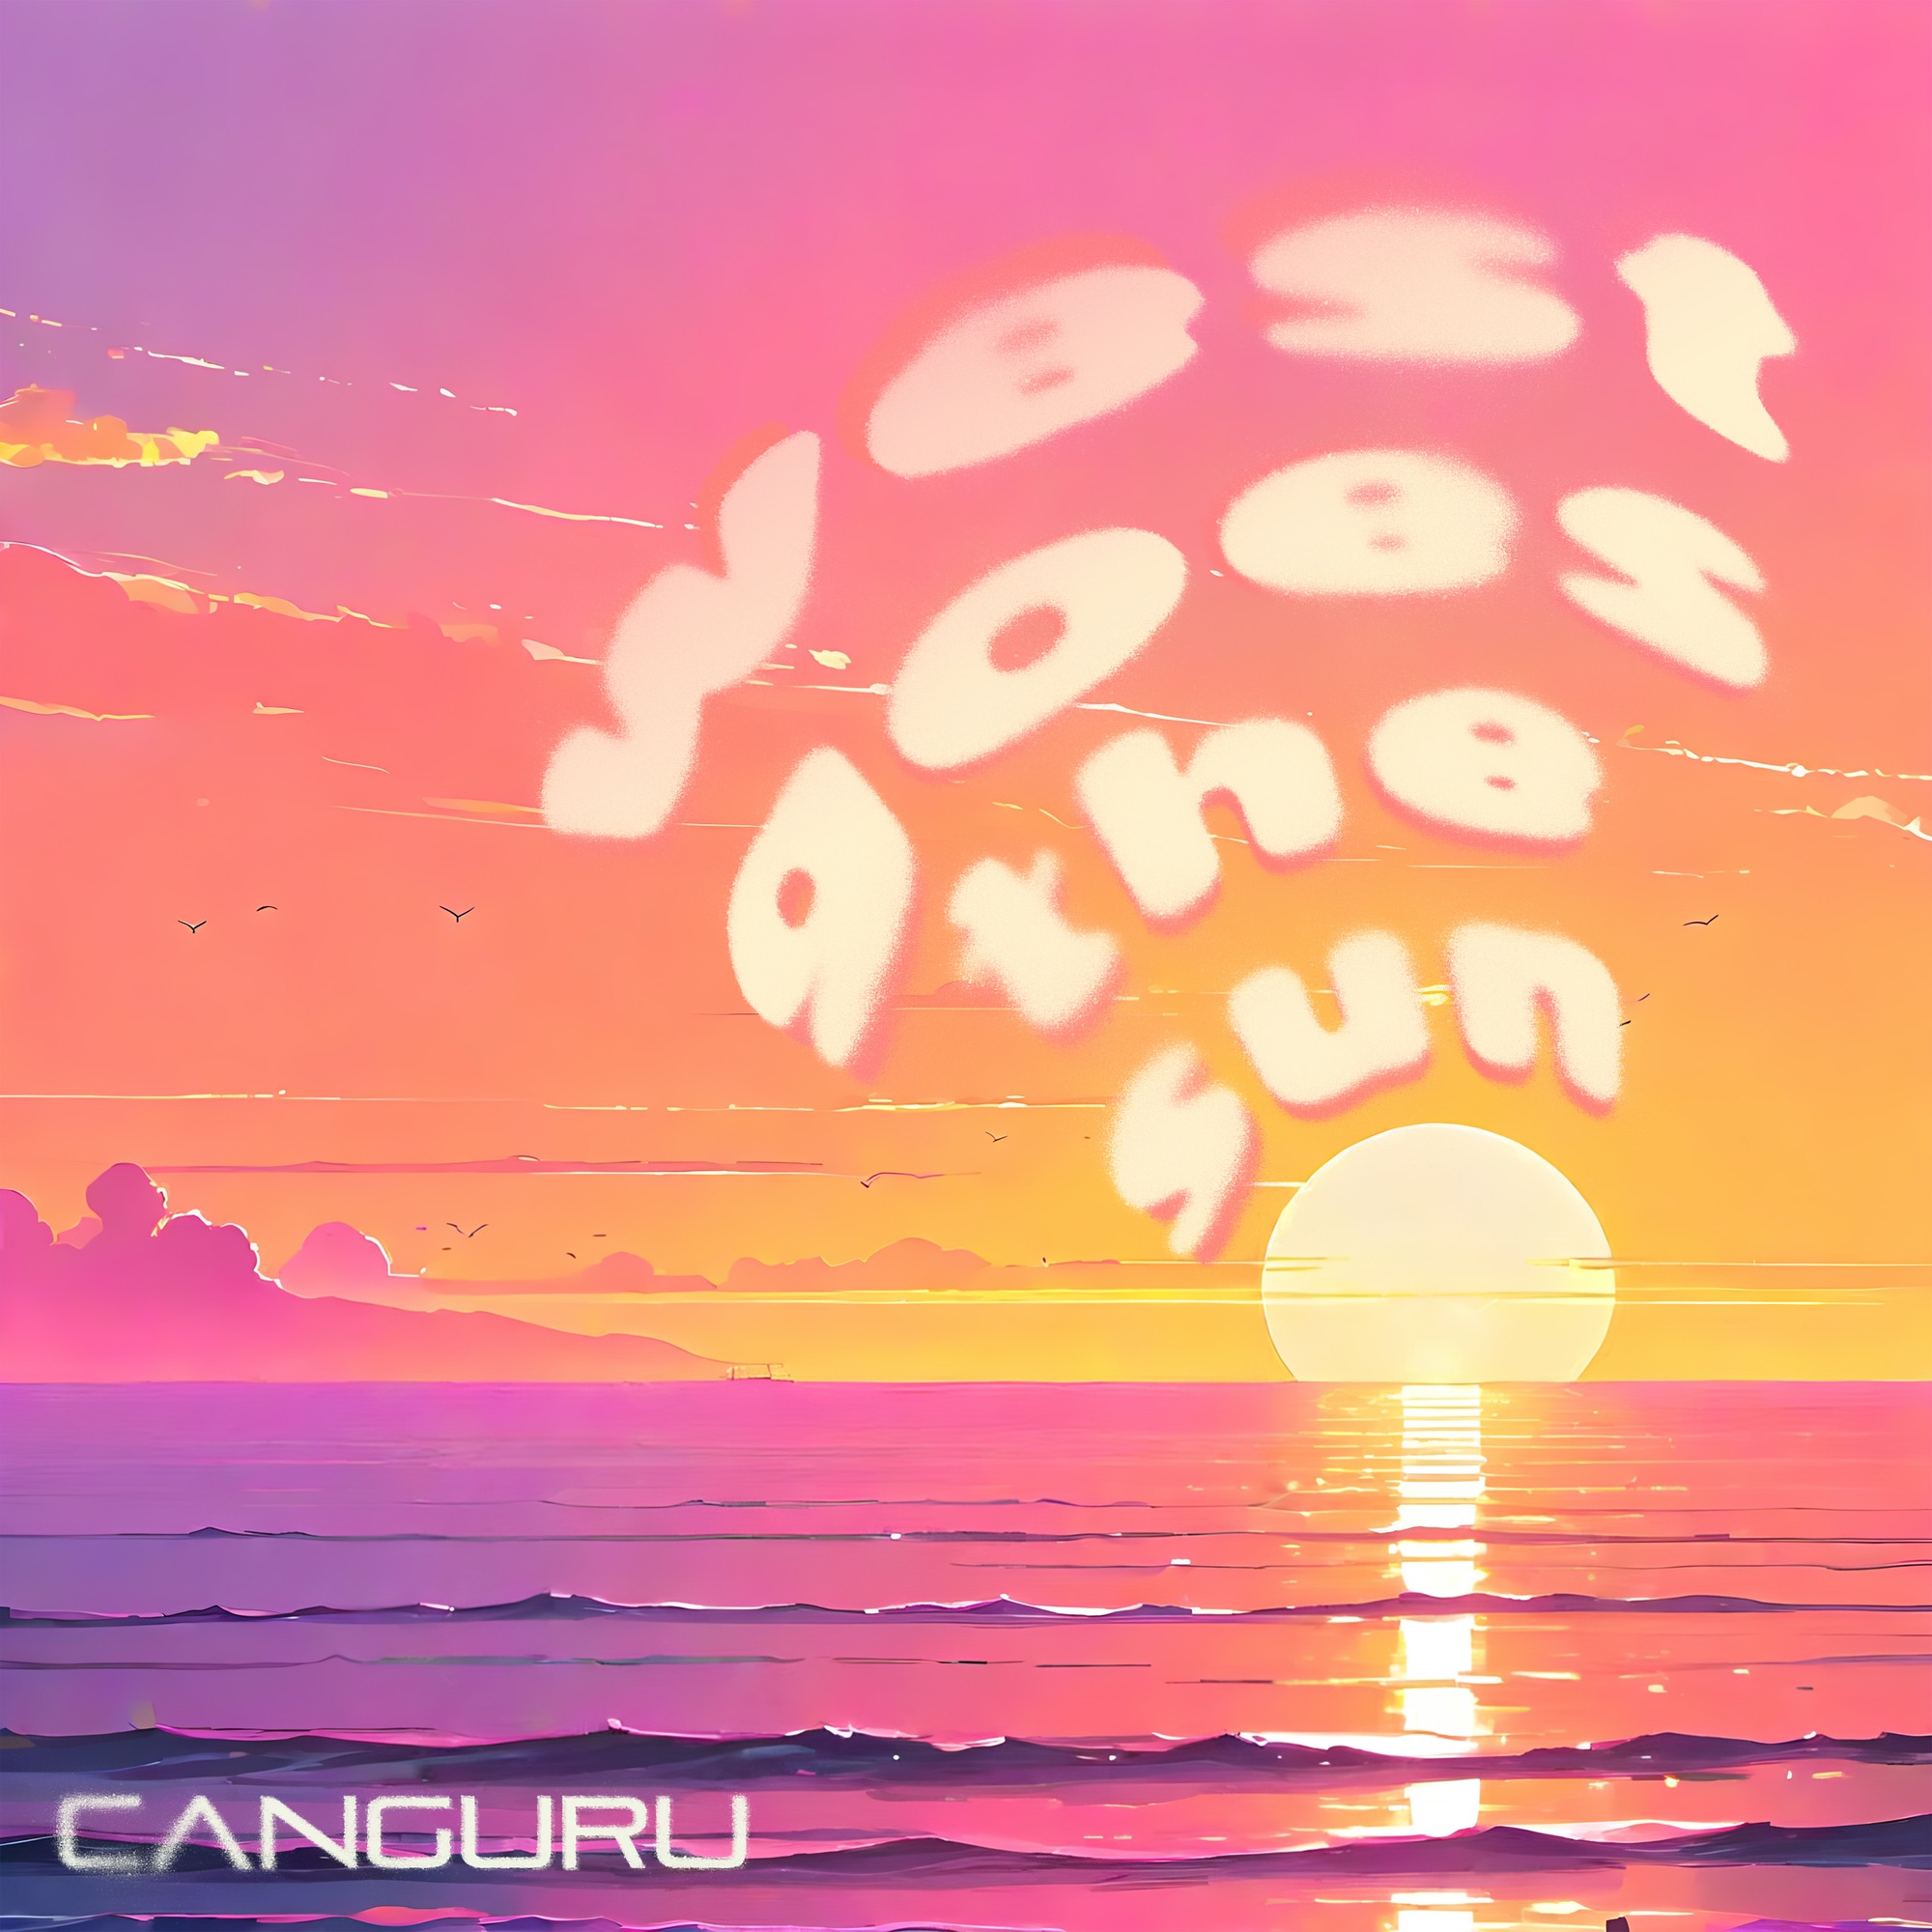 Experience the Captivating Vibes of Canguru's 'West Goes The Sun'